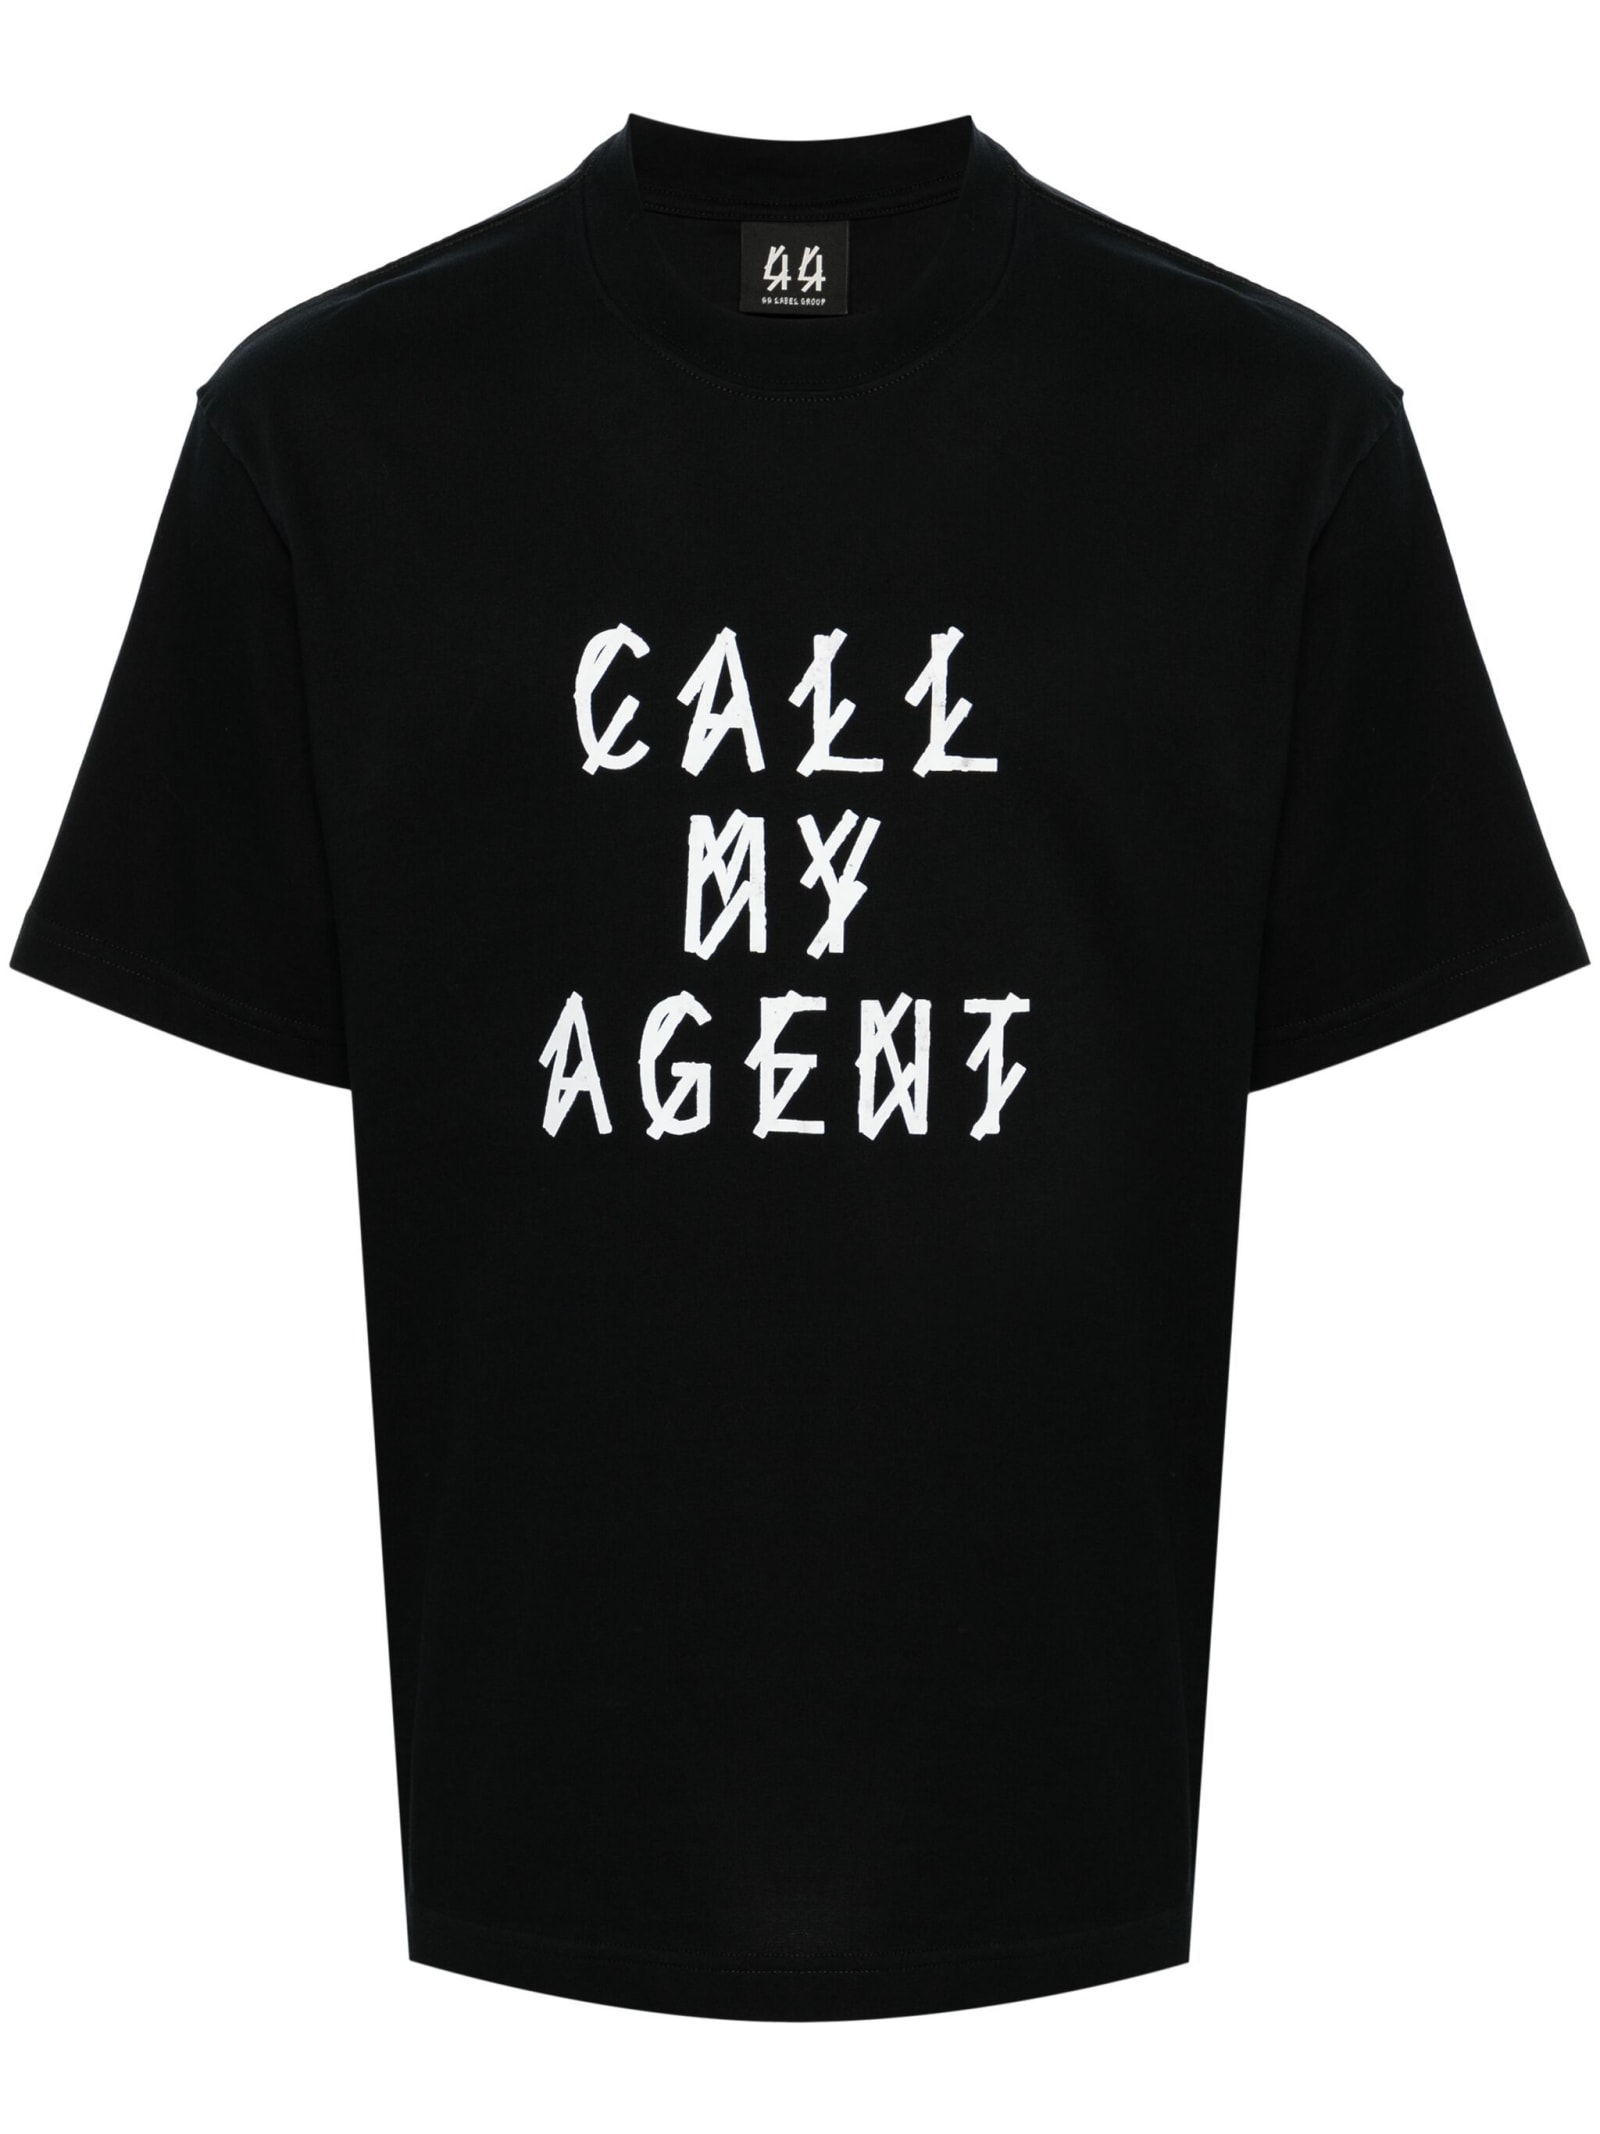 44 LABEL GROUP AGENT TEE